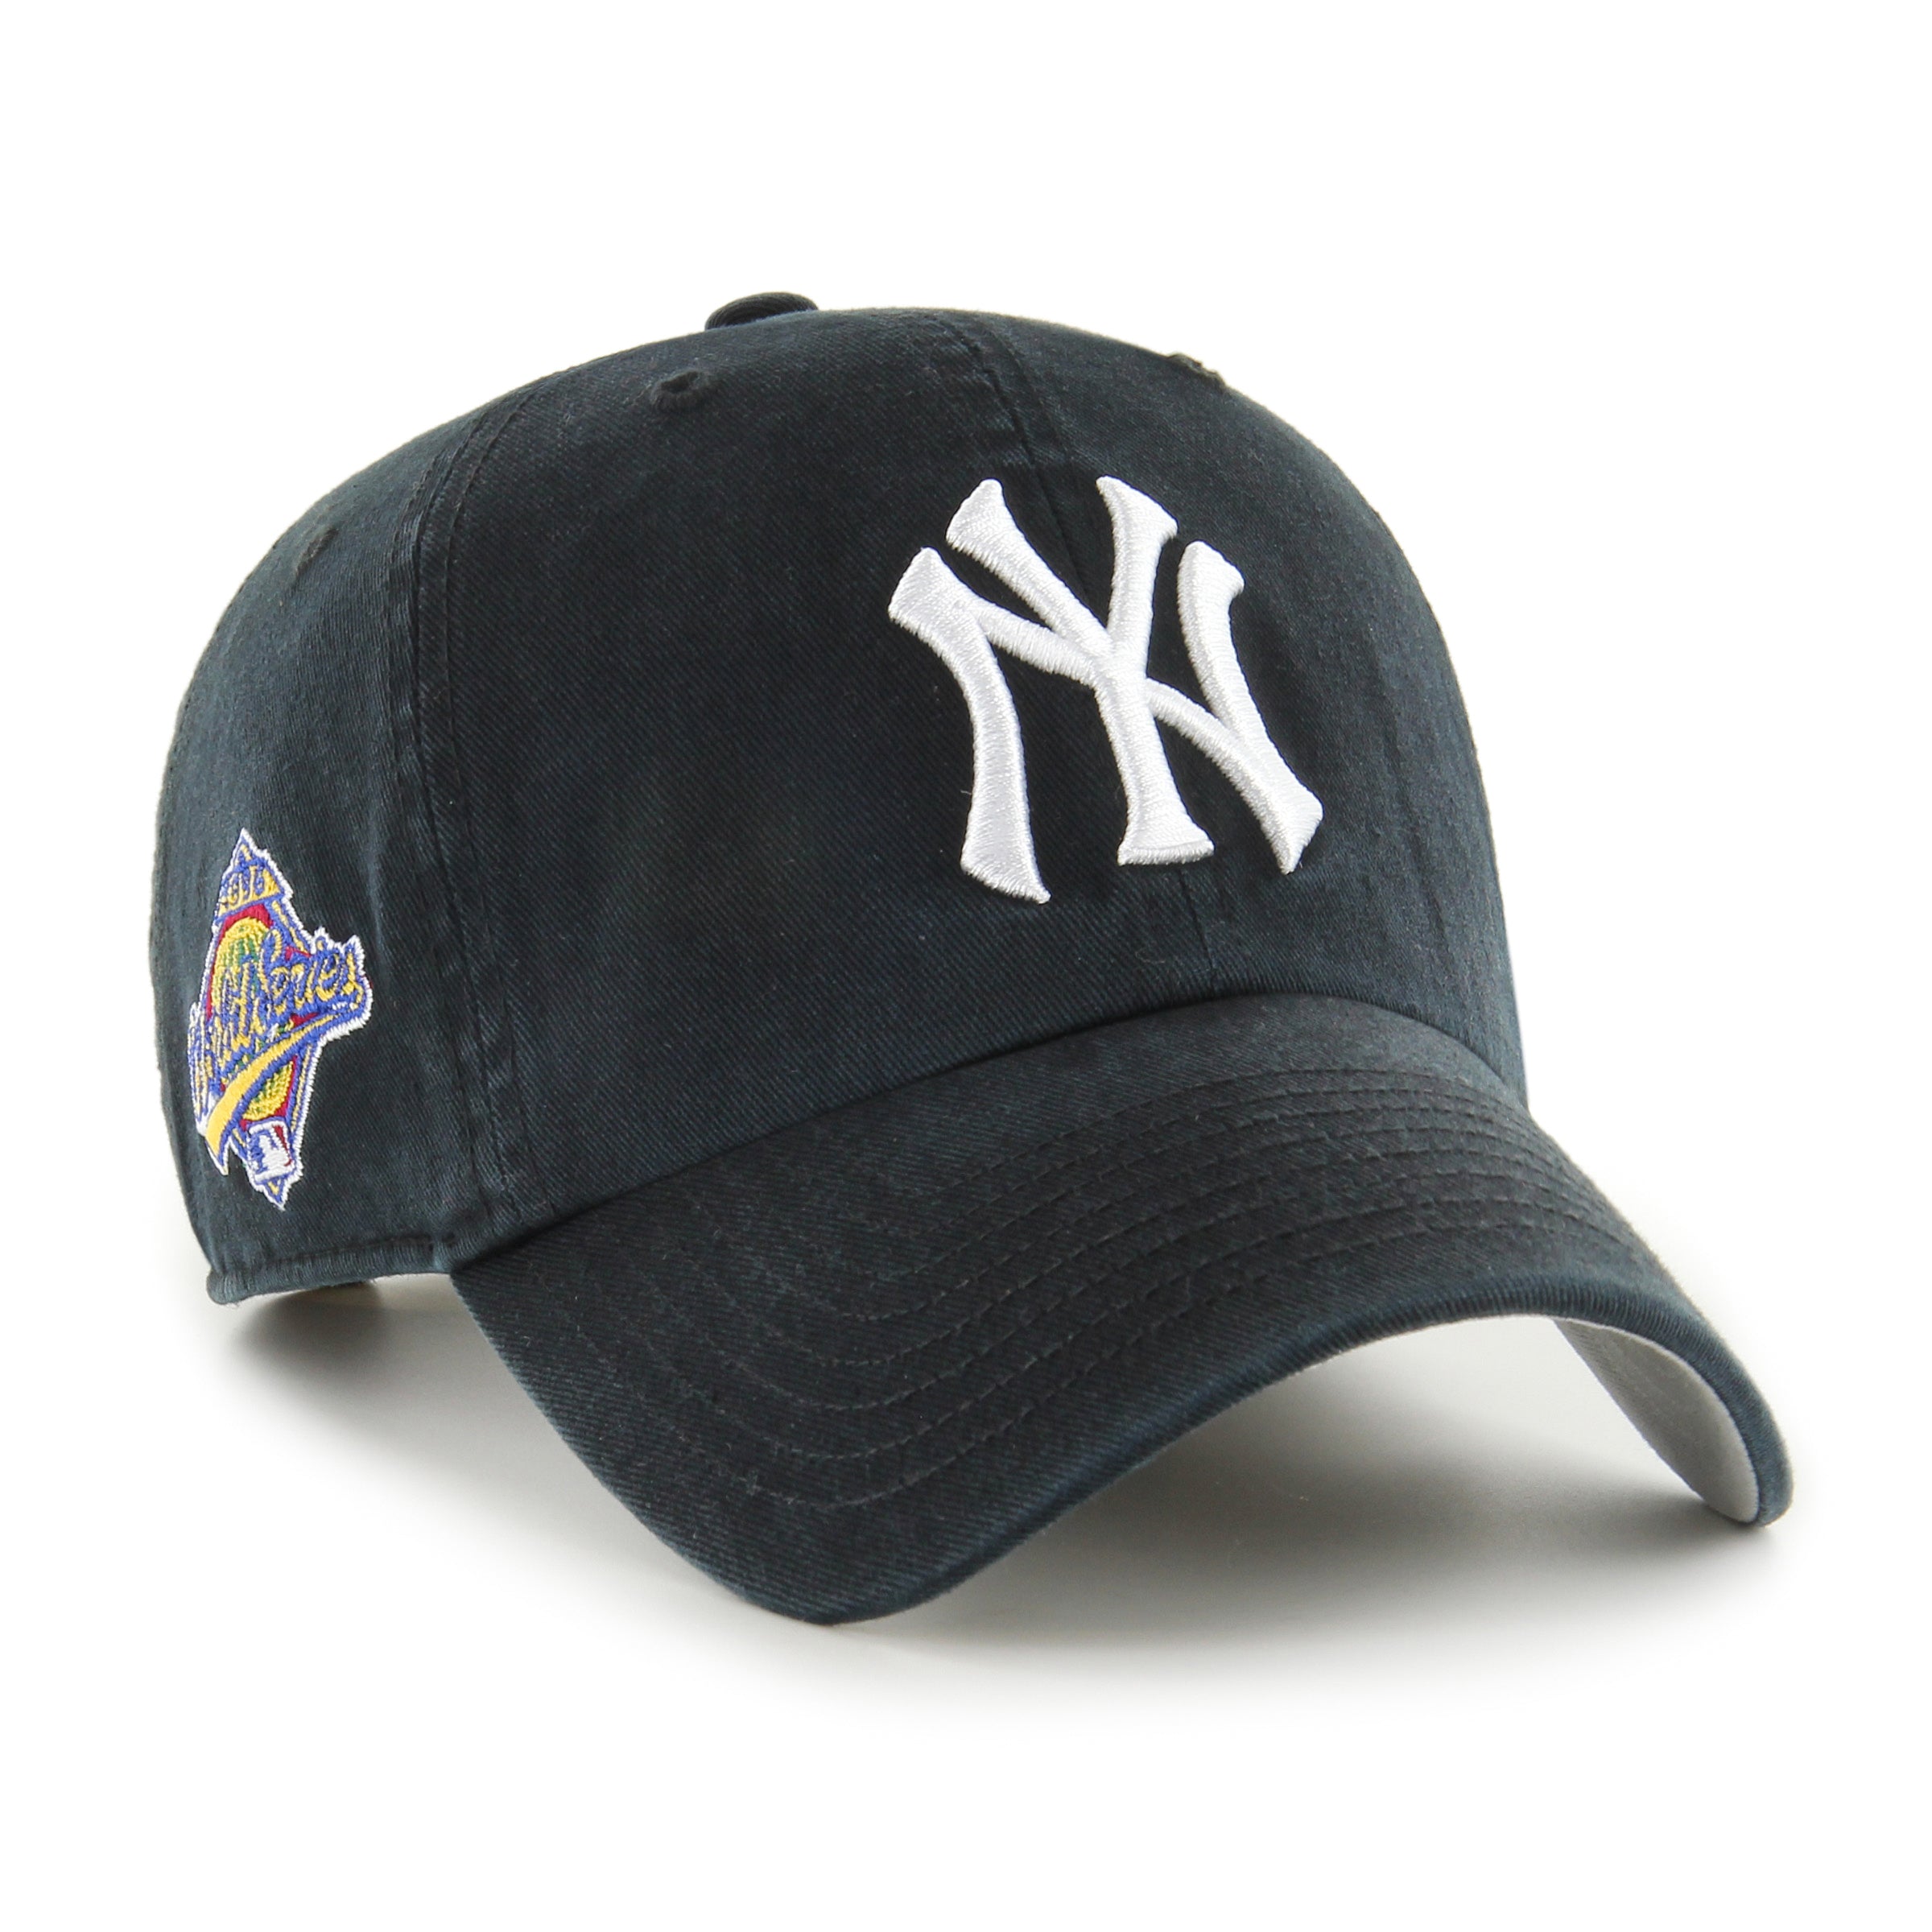 MLB NEW YORK YANKEES WORLD SERIES DOUBLE UNDER 47 CLEAN UP BLACK